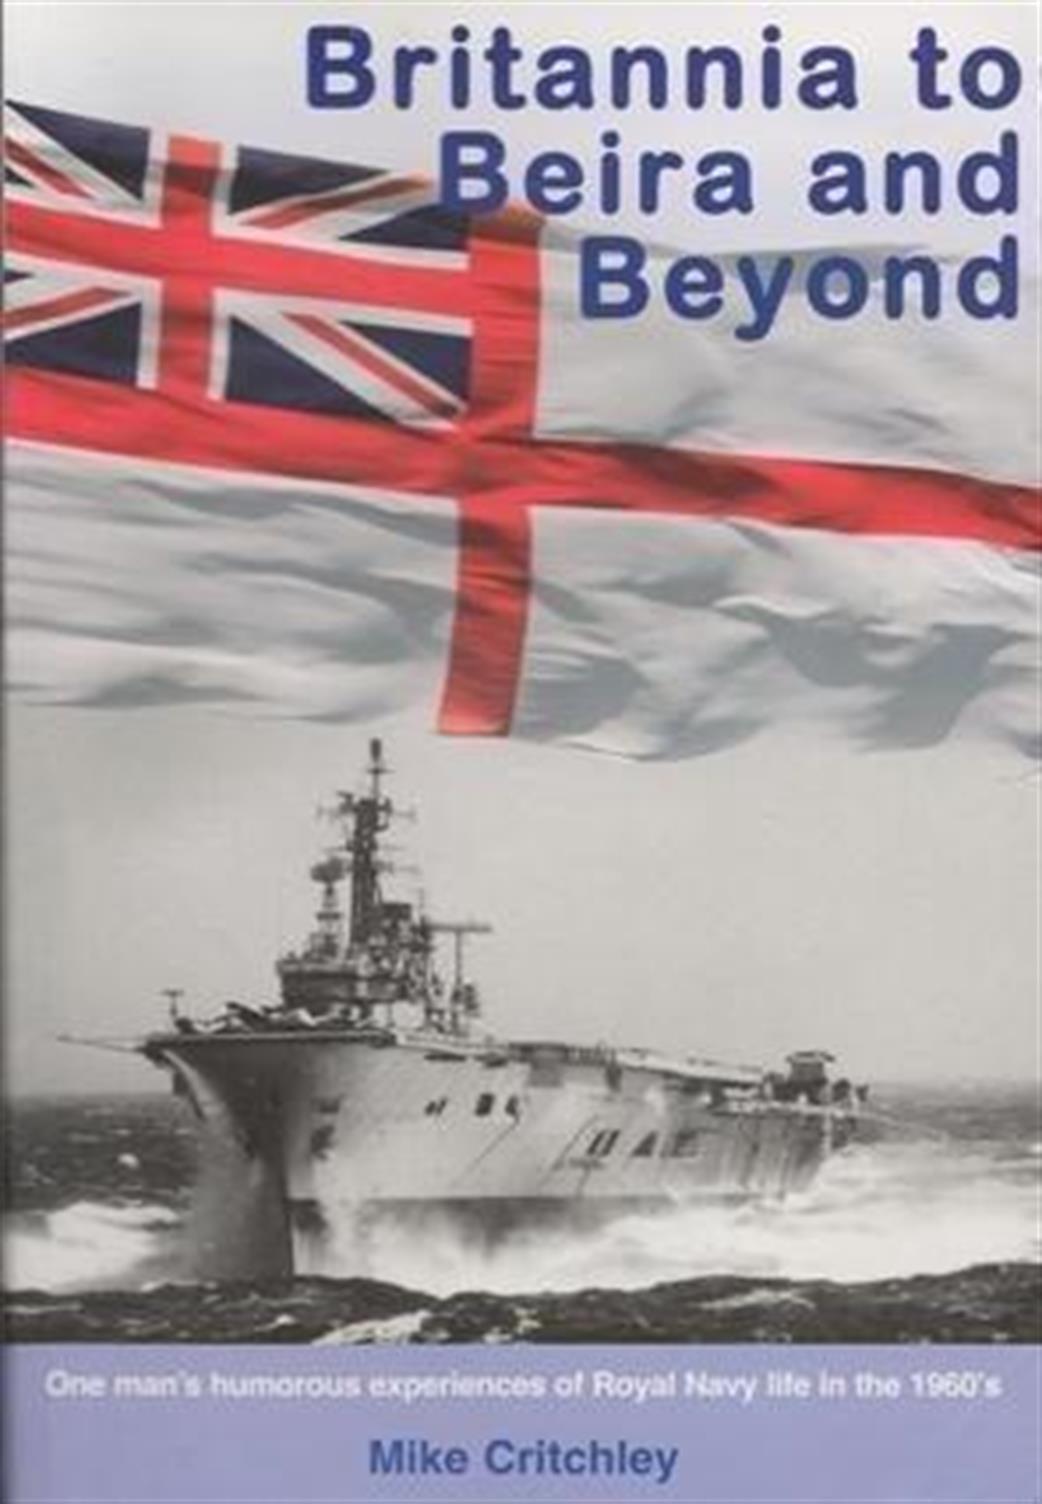 Maritime Books  978-1-904459-42-2 Britannia to Beira and Beyond Book by Mike Critchley